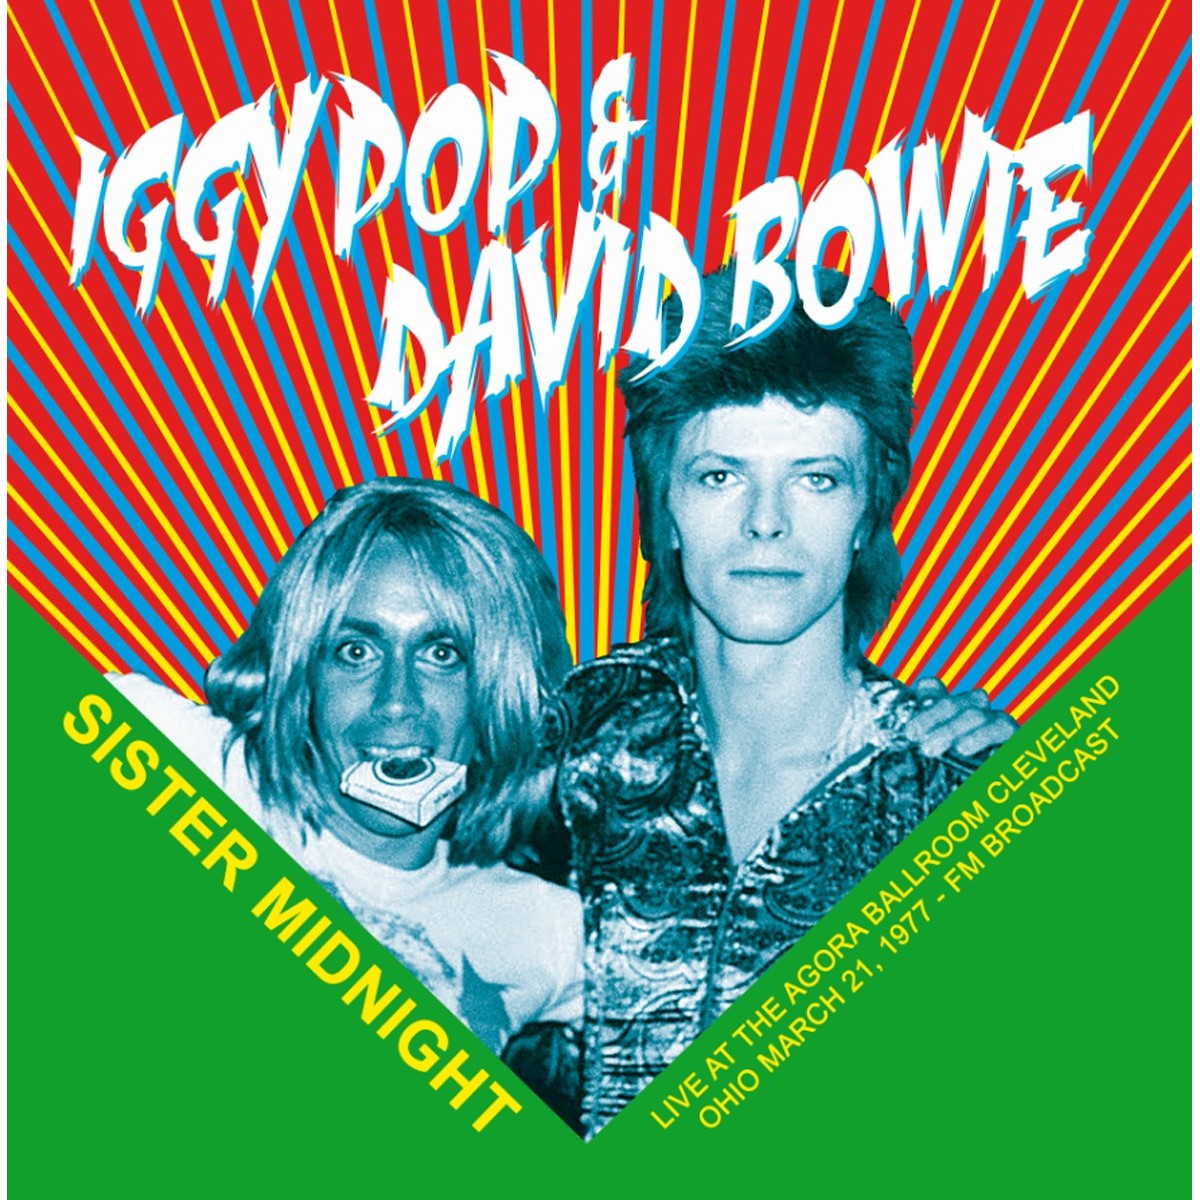 Iggy Pop & David Bowie - Sister Midnight: Live At The Agora Ballroom Cleveland Ohio March 21, 1977 - FM Broadcast